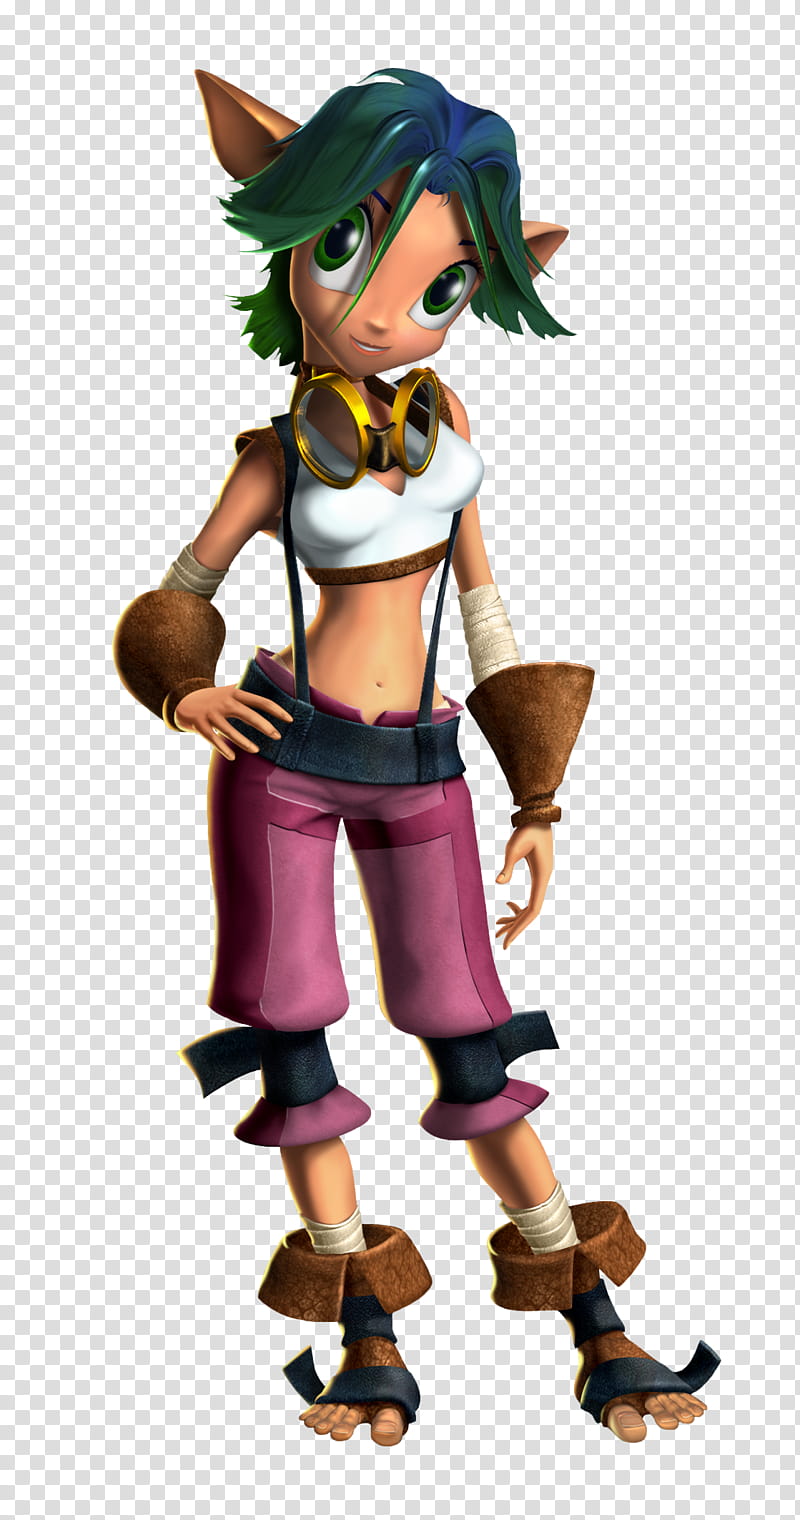 Jak and Daxter The Precursor Legacy Keira transparent background PNG clipart